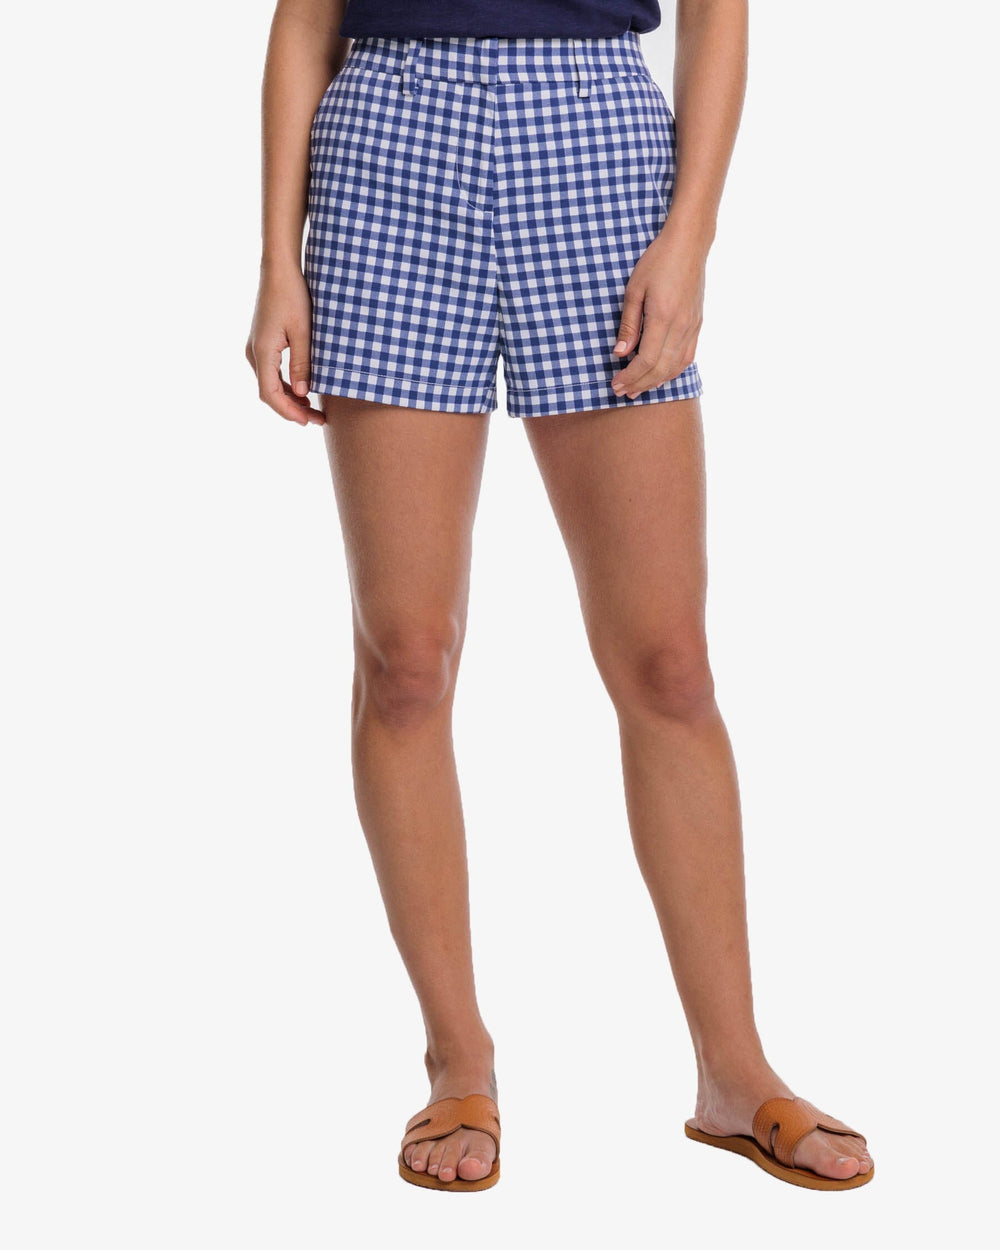 The front view of the Southern Tide Inlet Gingham Performance Short by Southern Tide - Nautical Navy